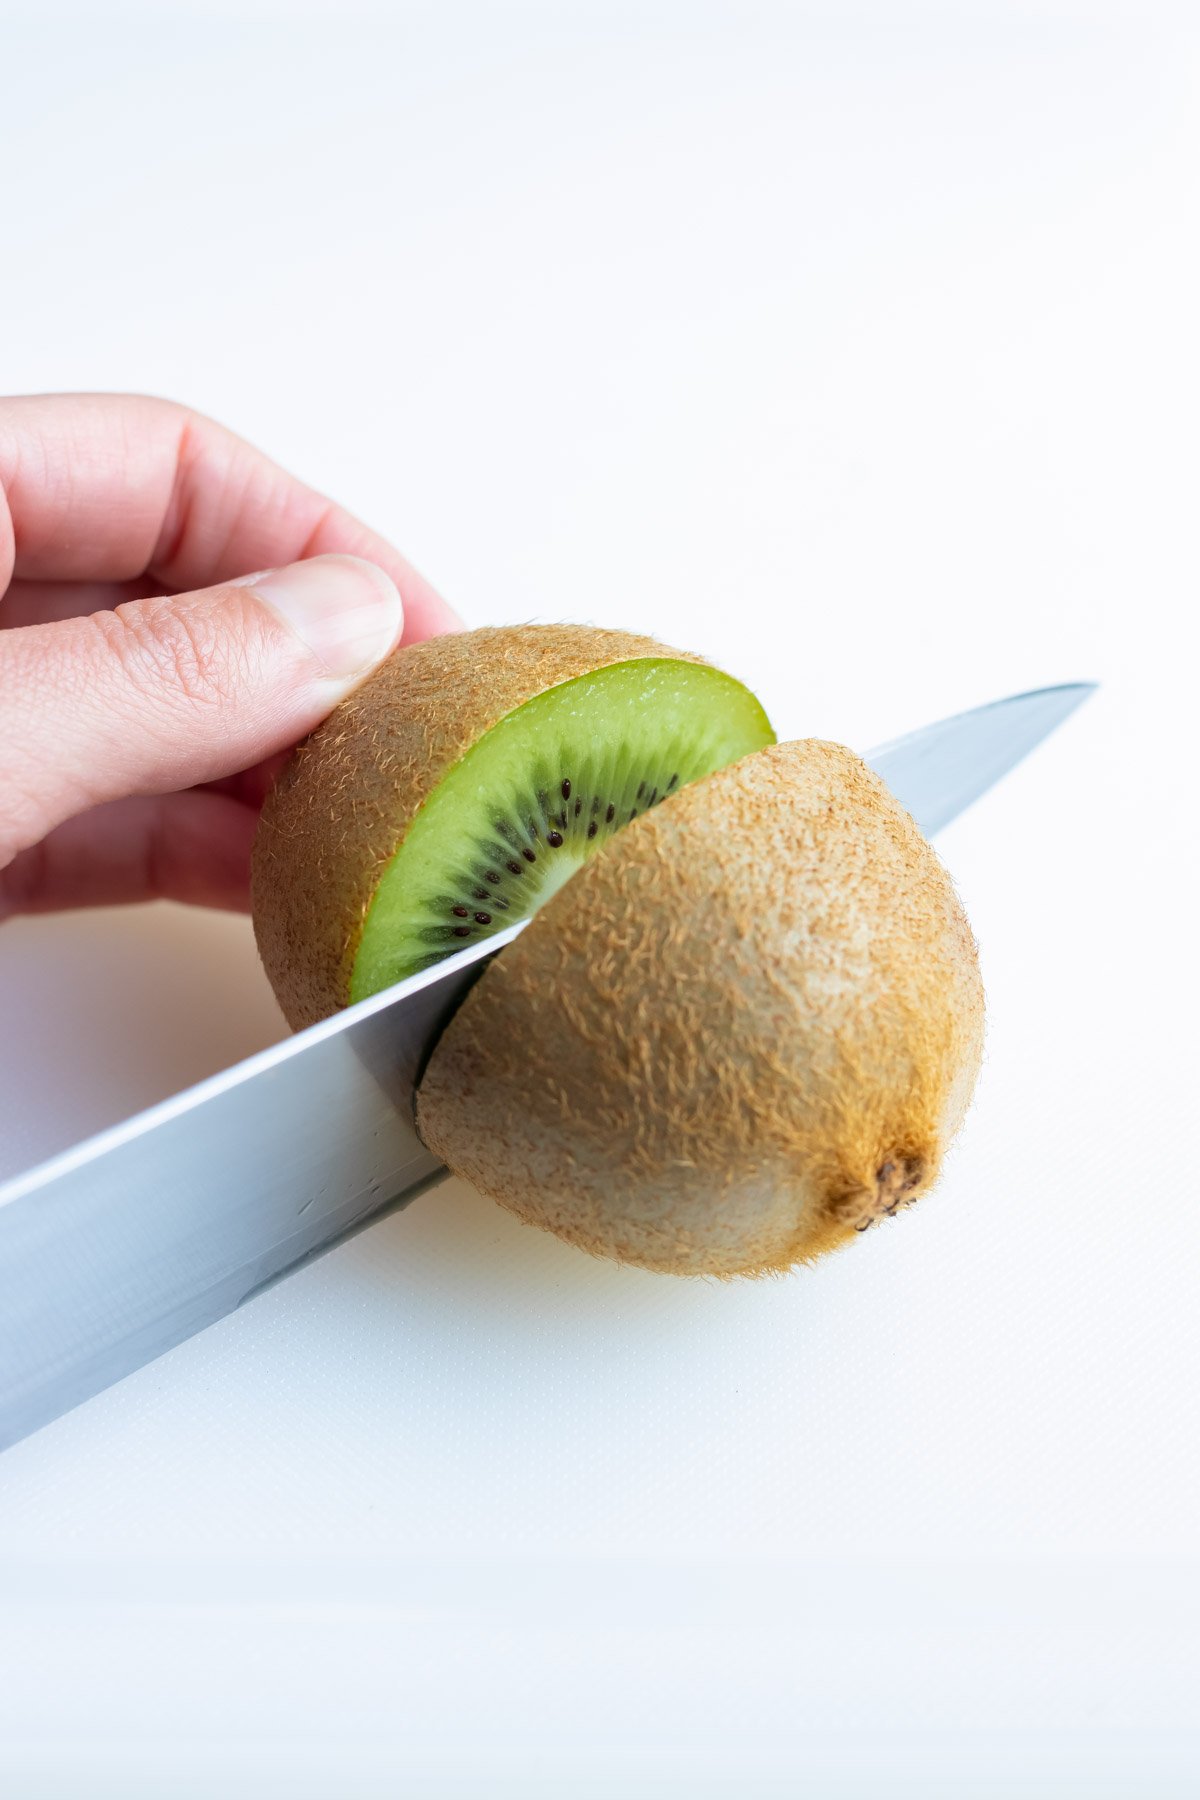 The kiwi is cut in half with a knife before peeling.